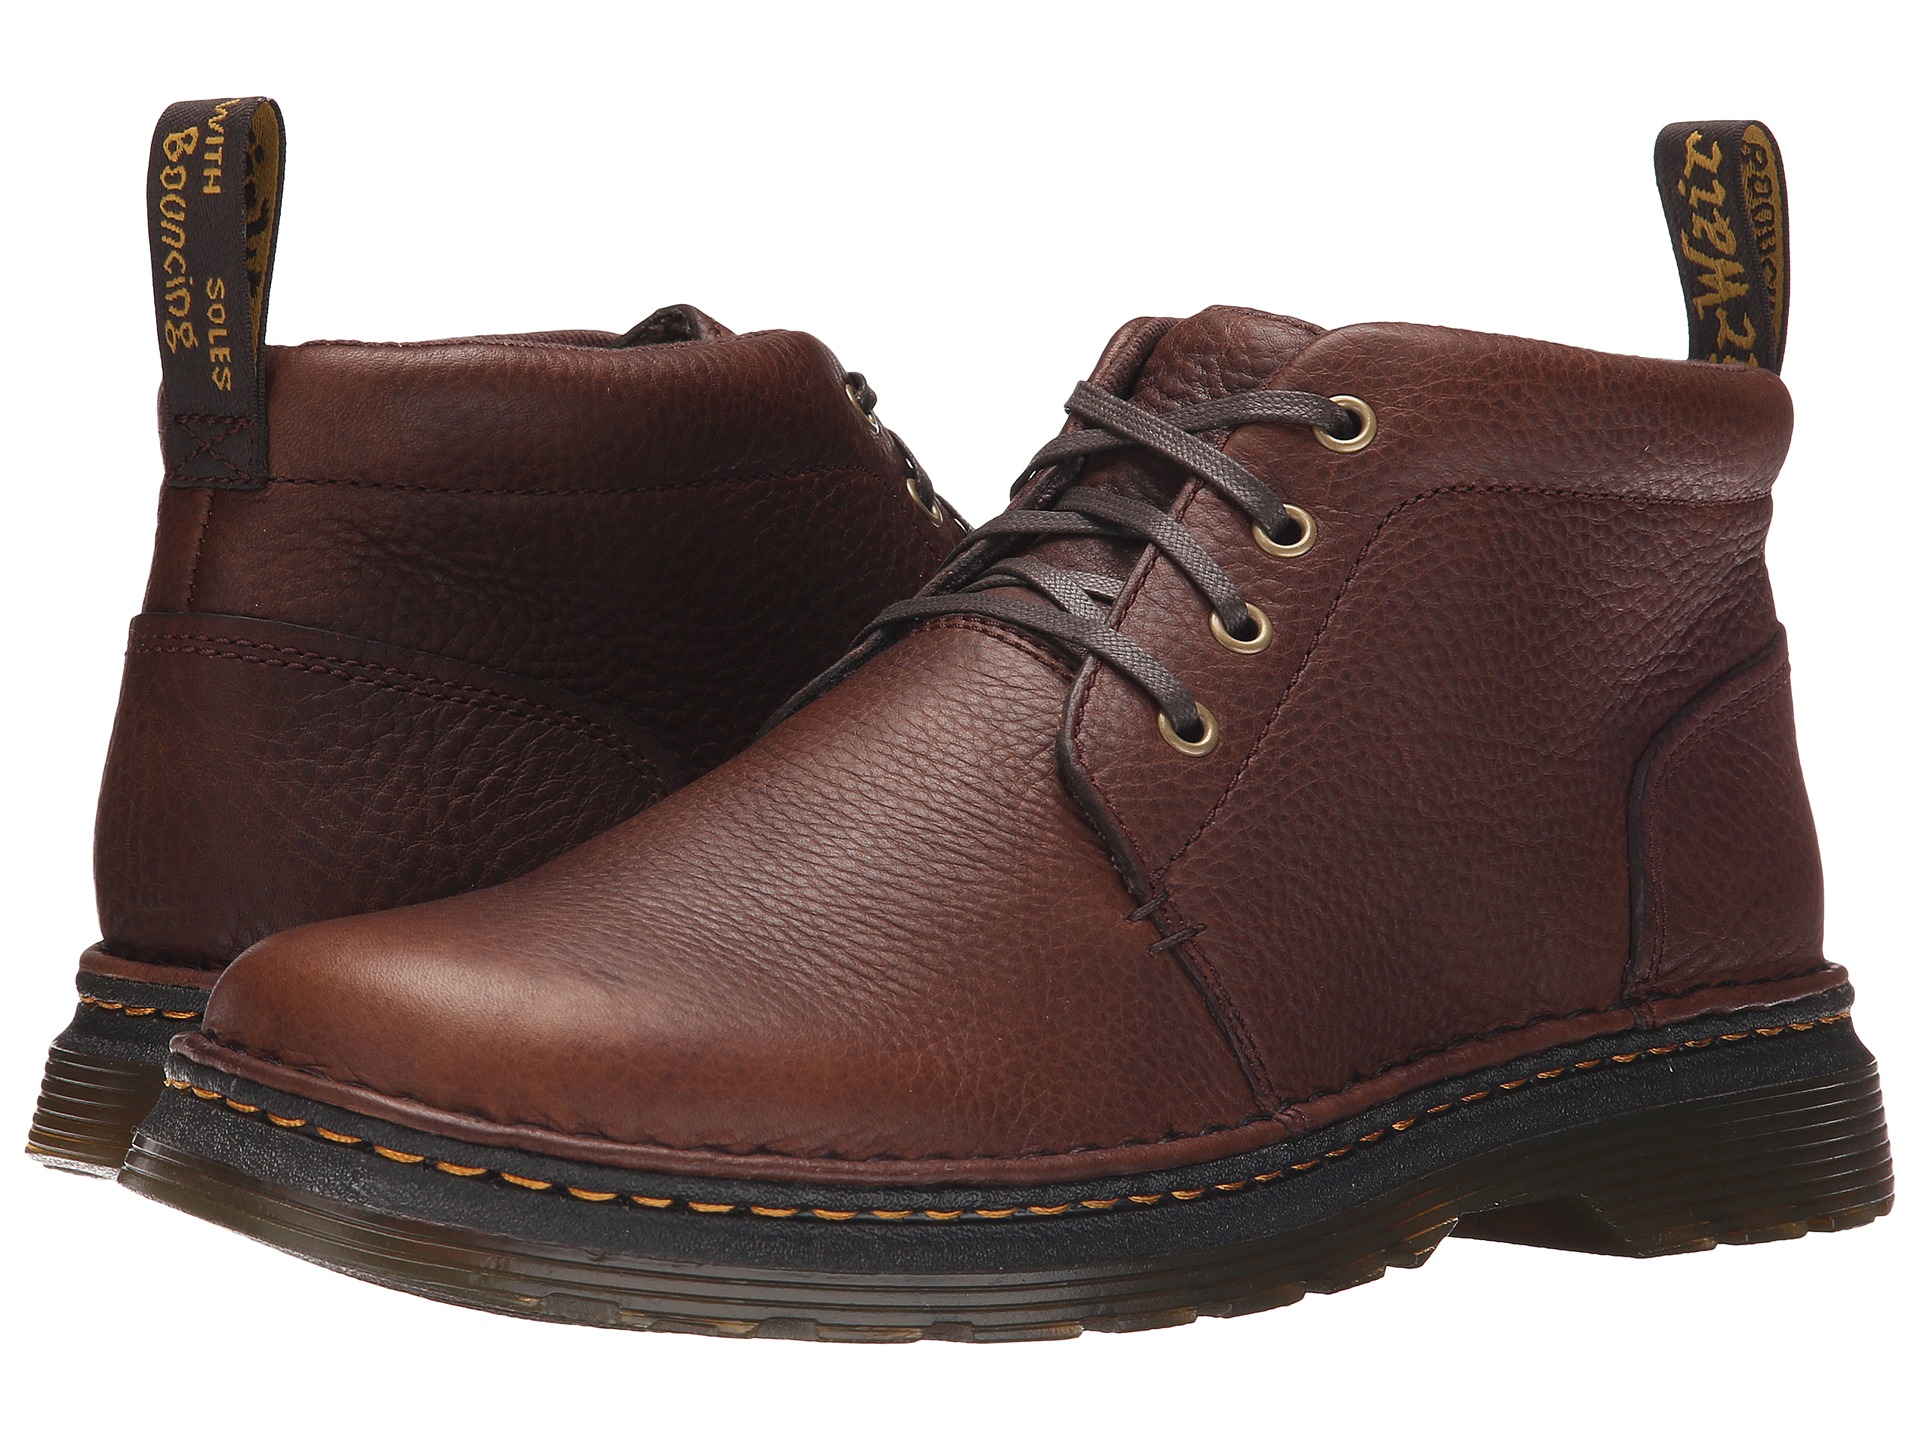 Dr. Martens Lea 4-Eye Chukka Boot Dark Brown Grizzly/Hi Suede WP ...